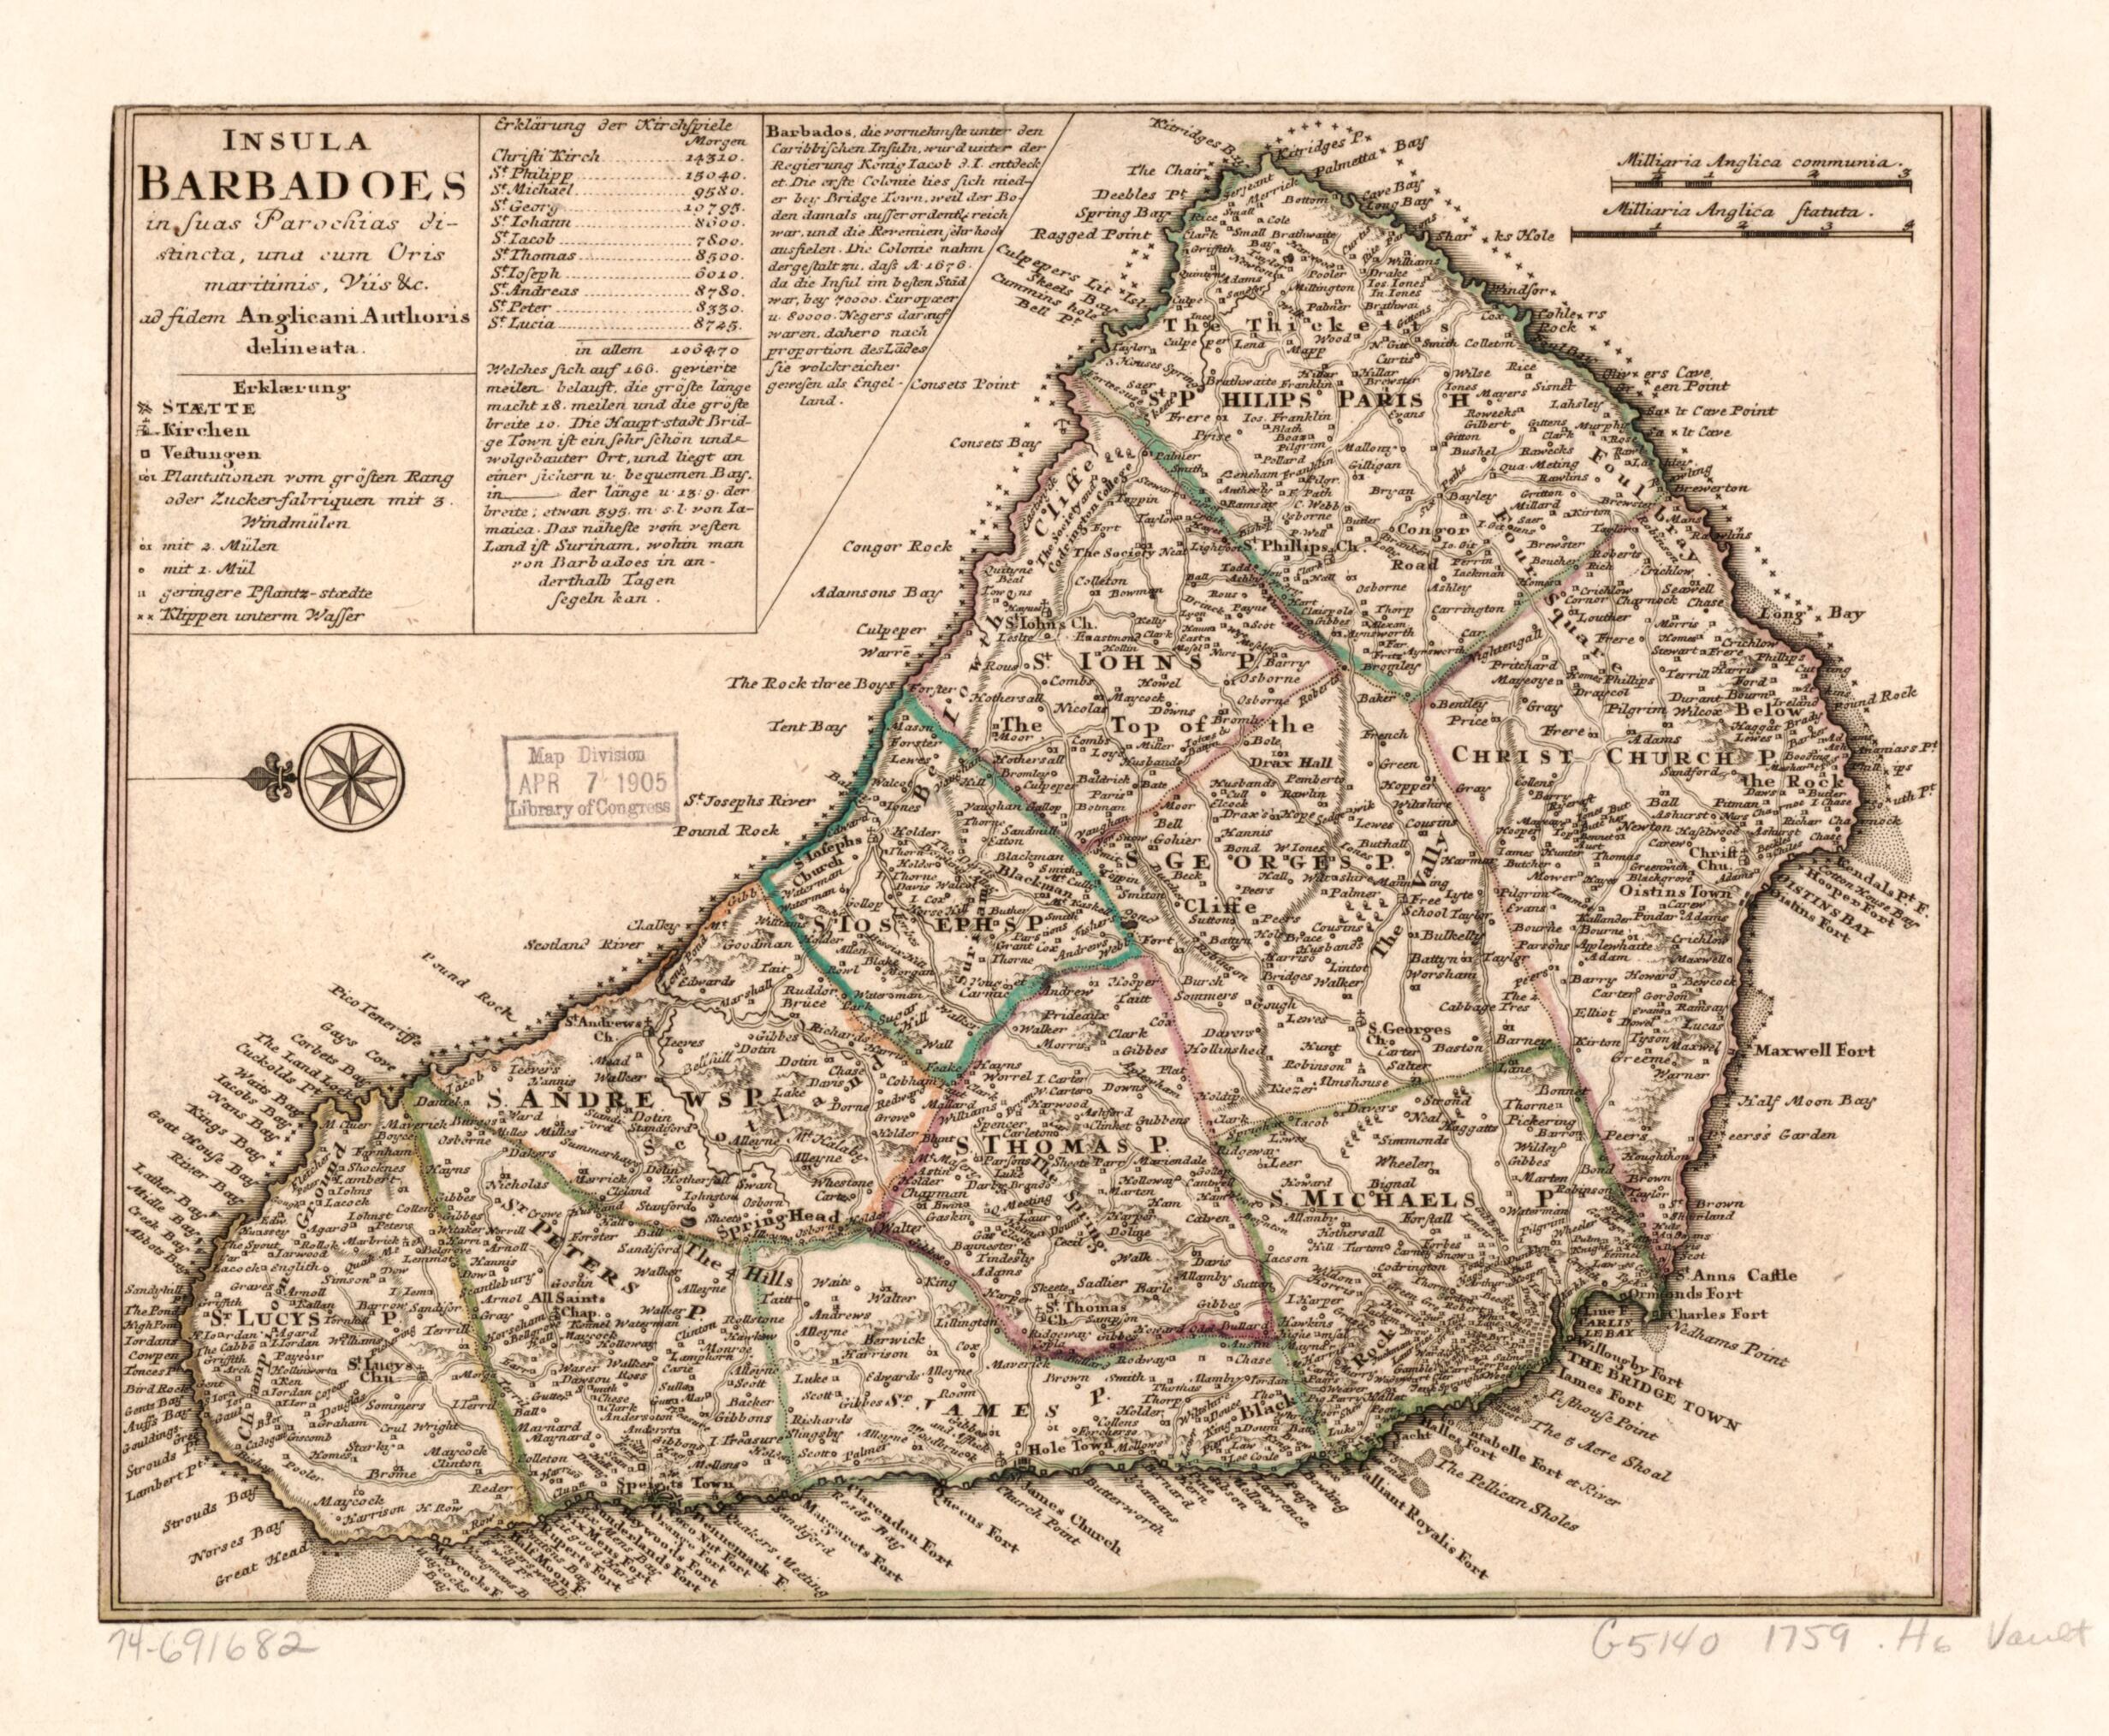 This old map of Insula Barbadoes In Suas Parochias Distincts, Una Cum Oris Maritimis, Vüs &amp;c. Ad Fidem Anglicani Authoris Delineata from 1759 was created by  Homann Erben (Firm) in 1759